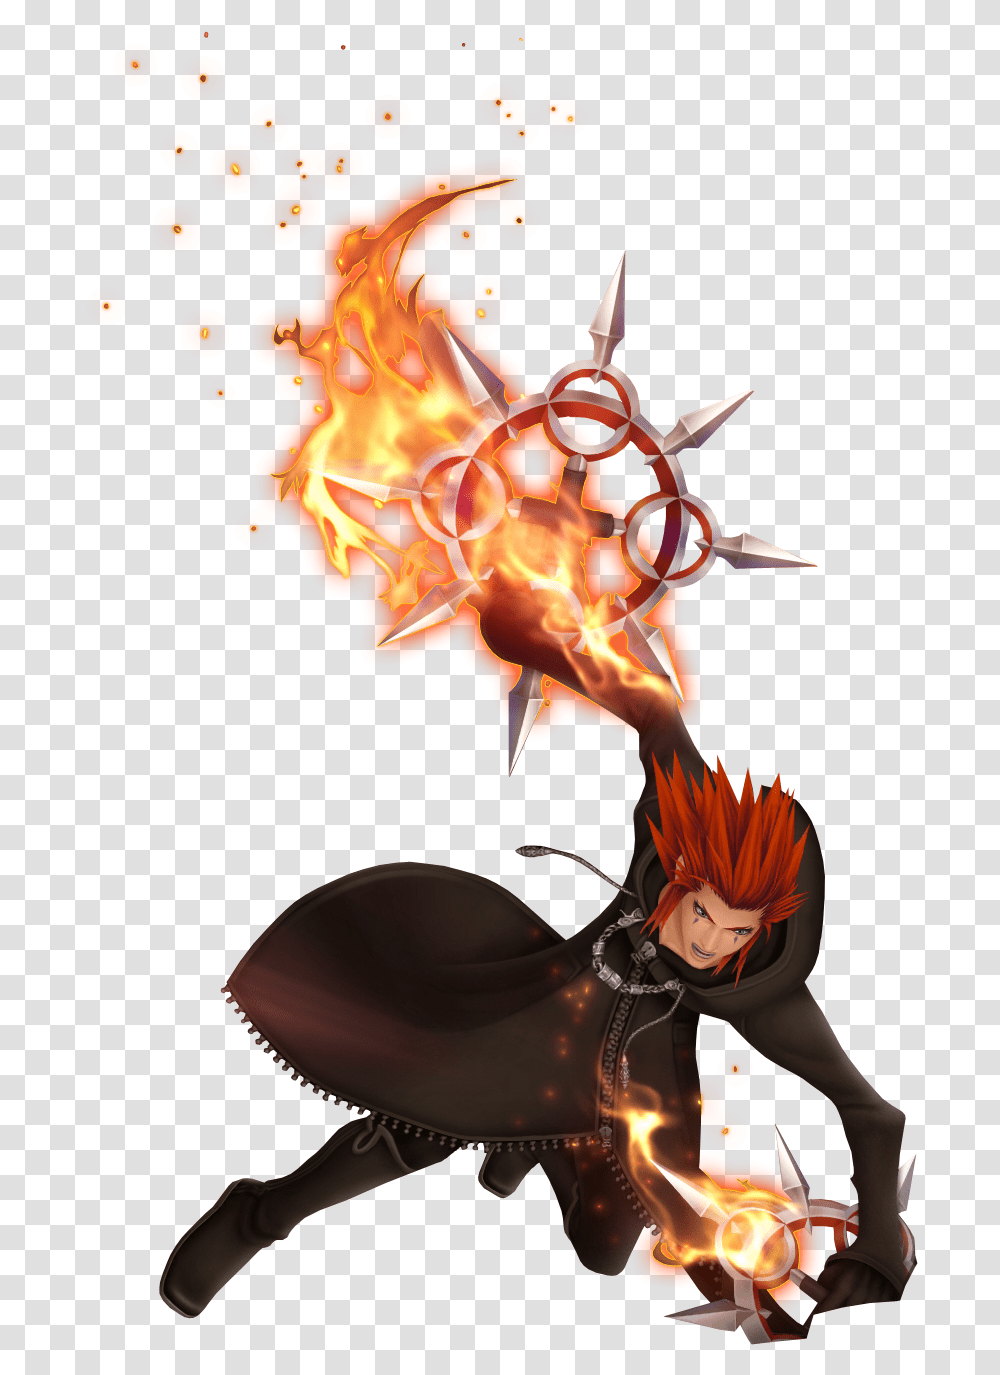 Kingdom Hearts Characters Axel Kingdom Hearts, Fire, Flame, Person, Human Transparent Png